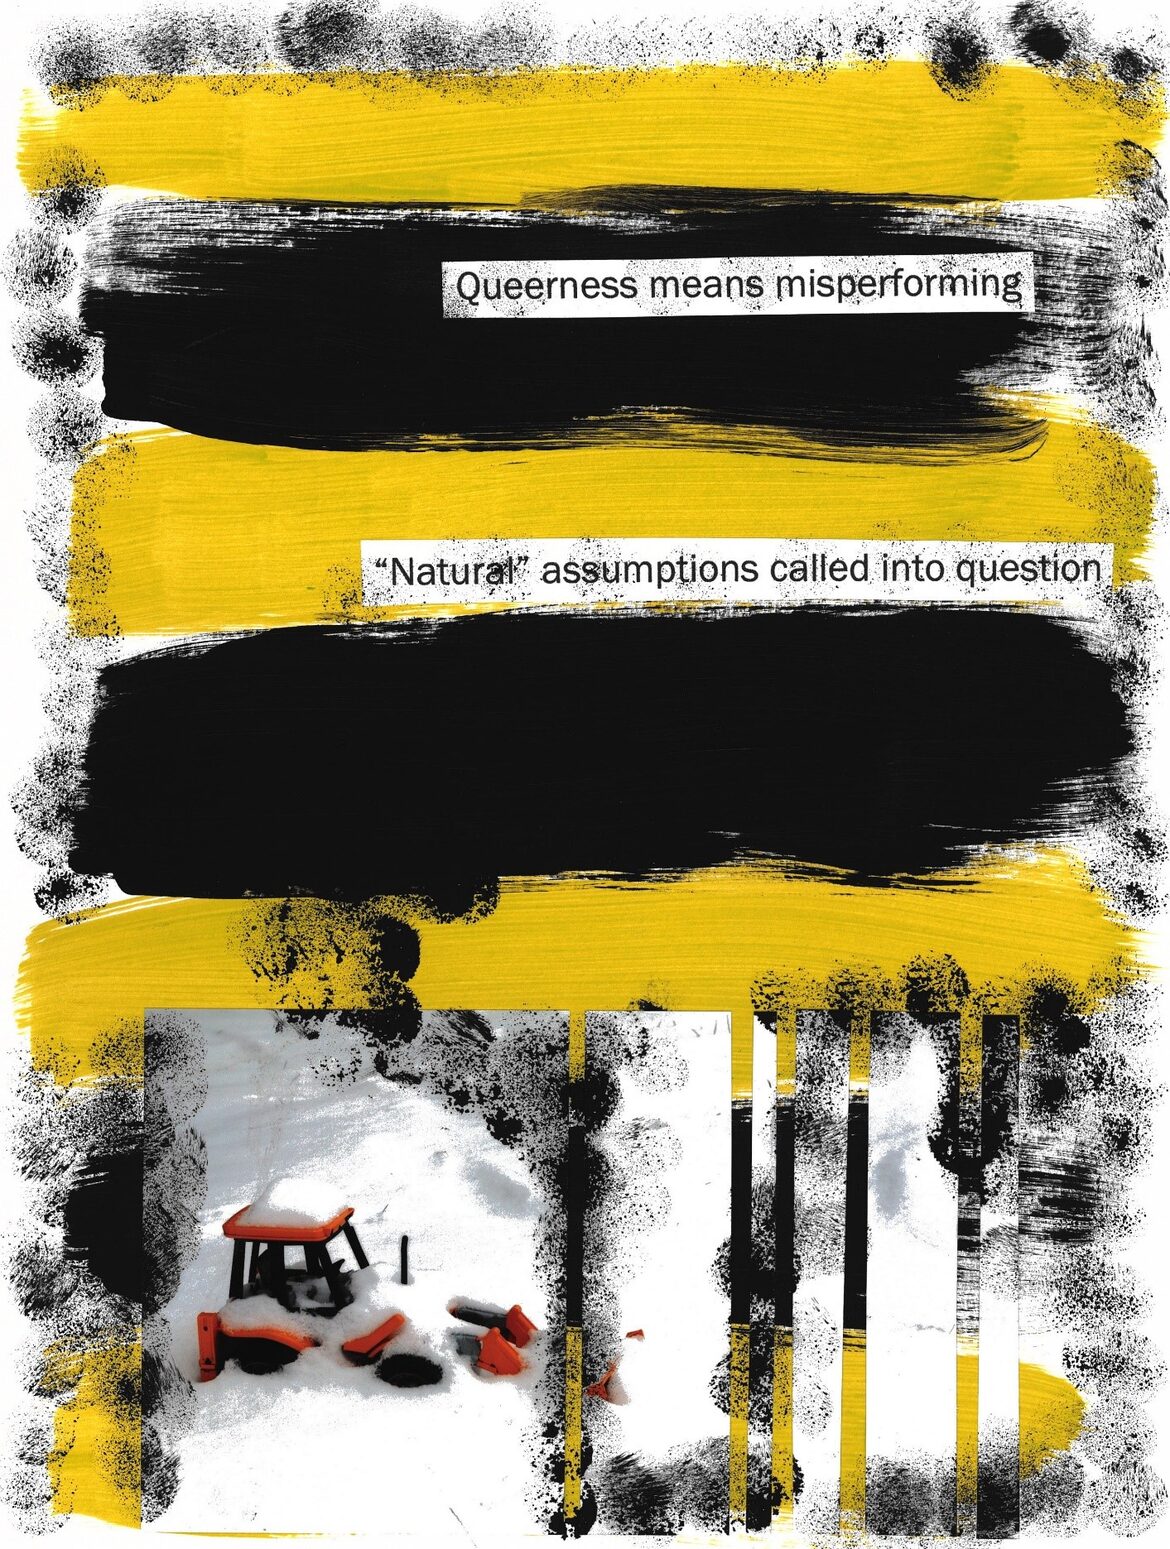 A background of black and yellow overlaid with the image of a snow-covered tractor. Text says 